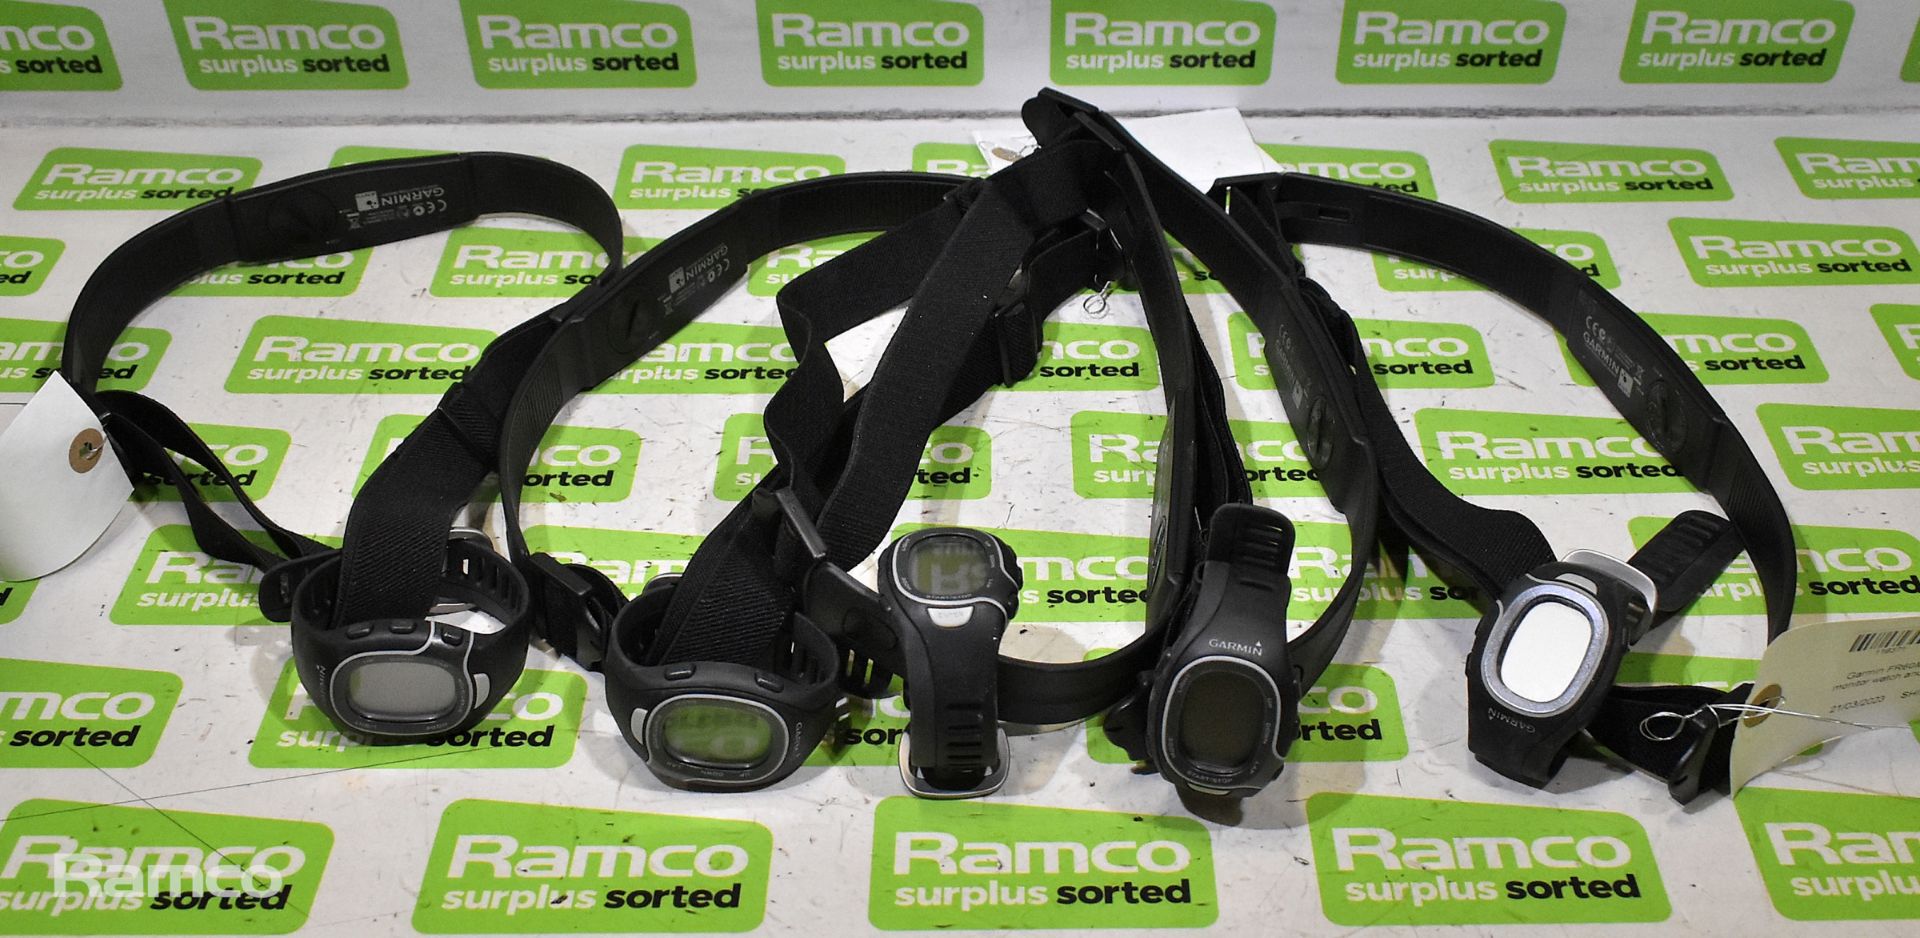 5x Garmin FR60M Heart rate monitor watches and chest straps